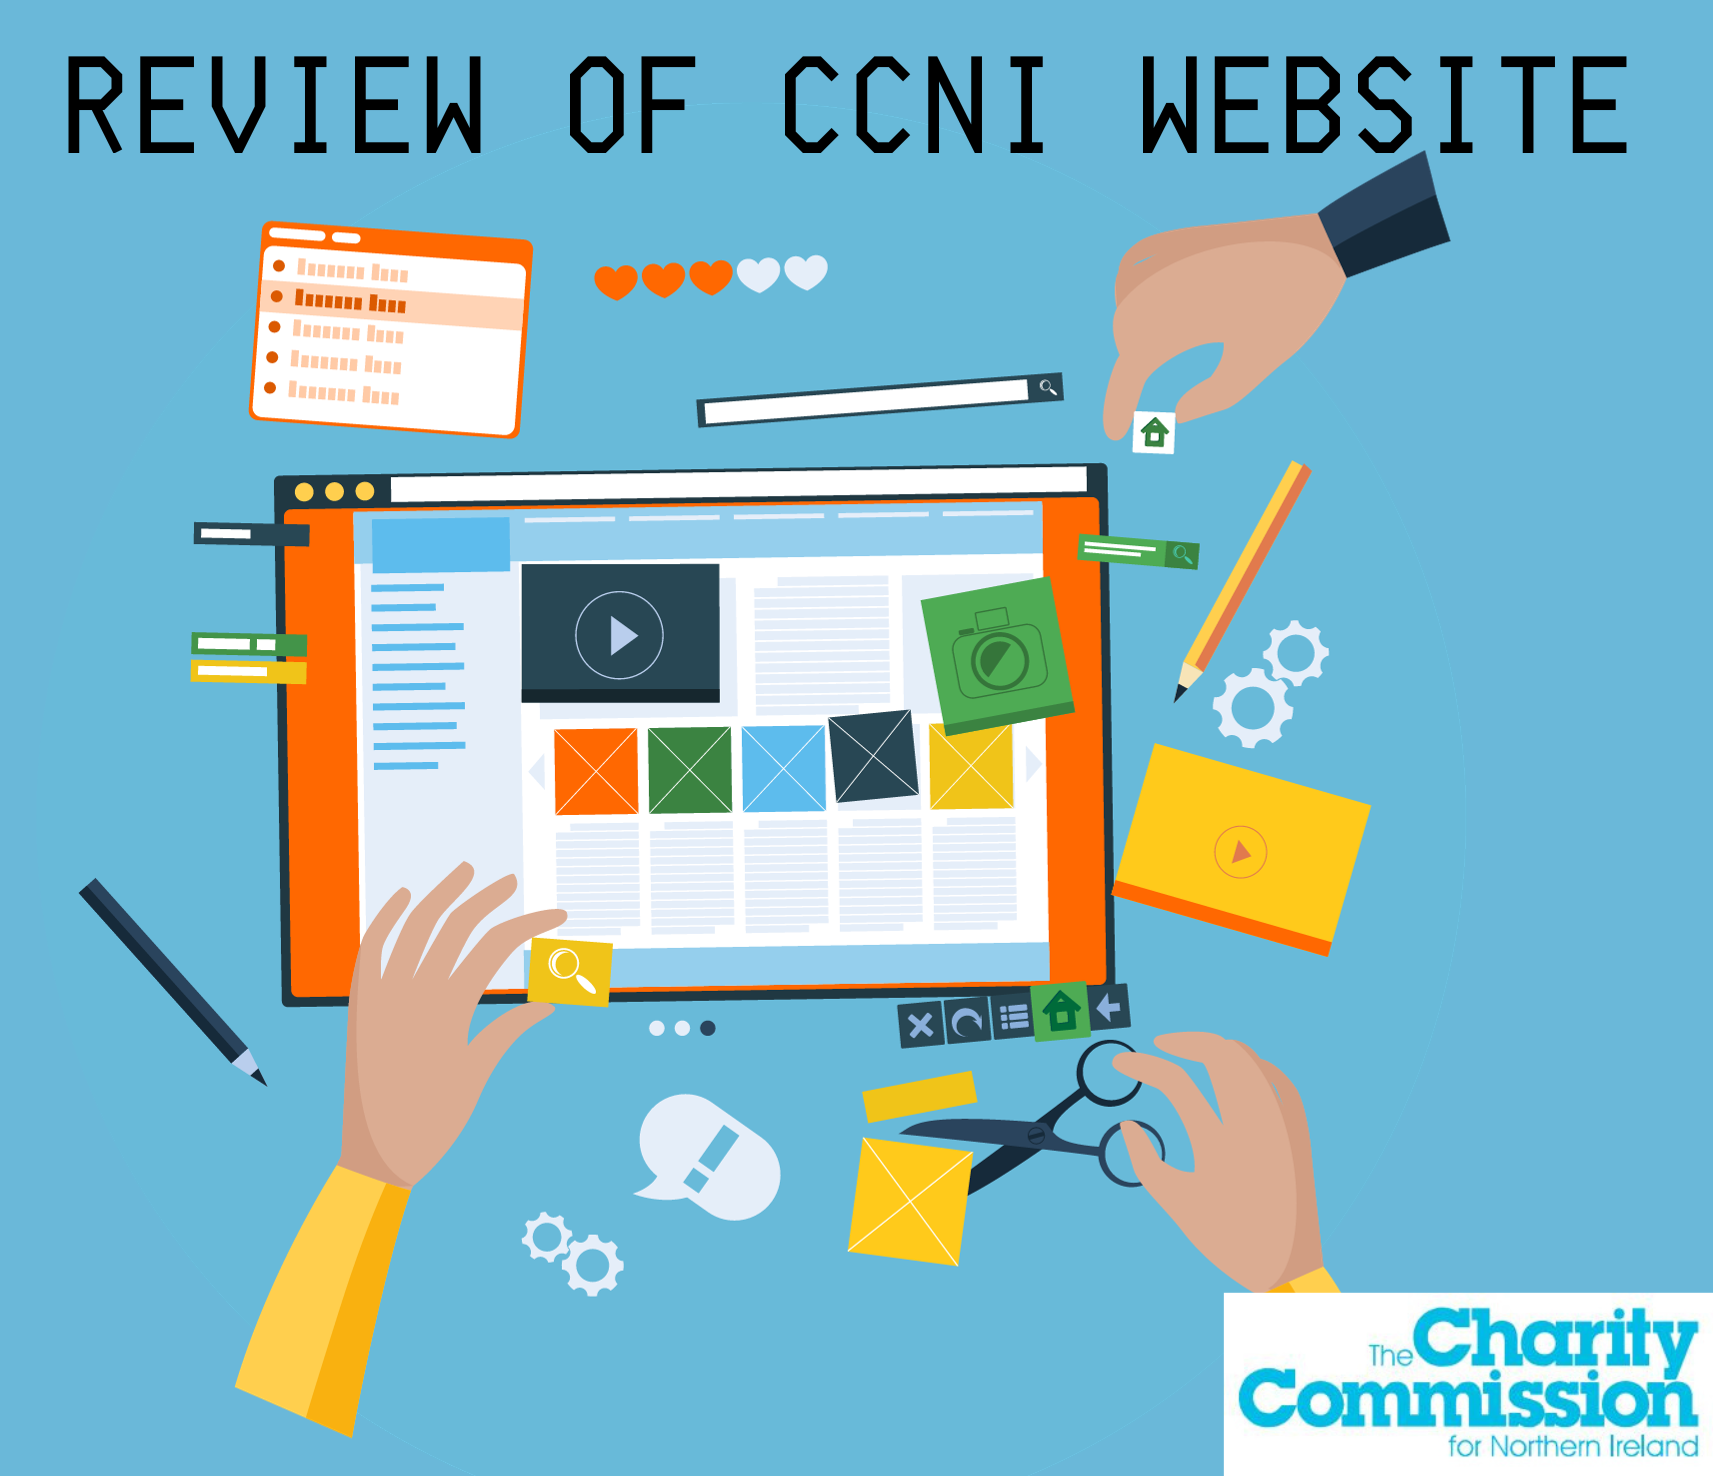 Review of CCNI website